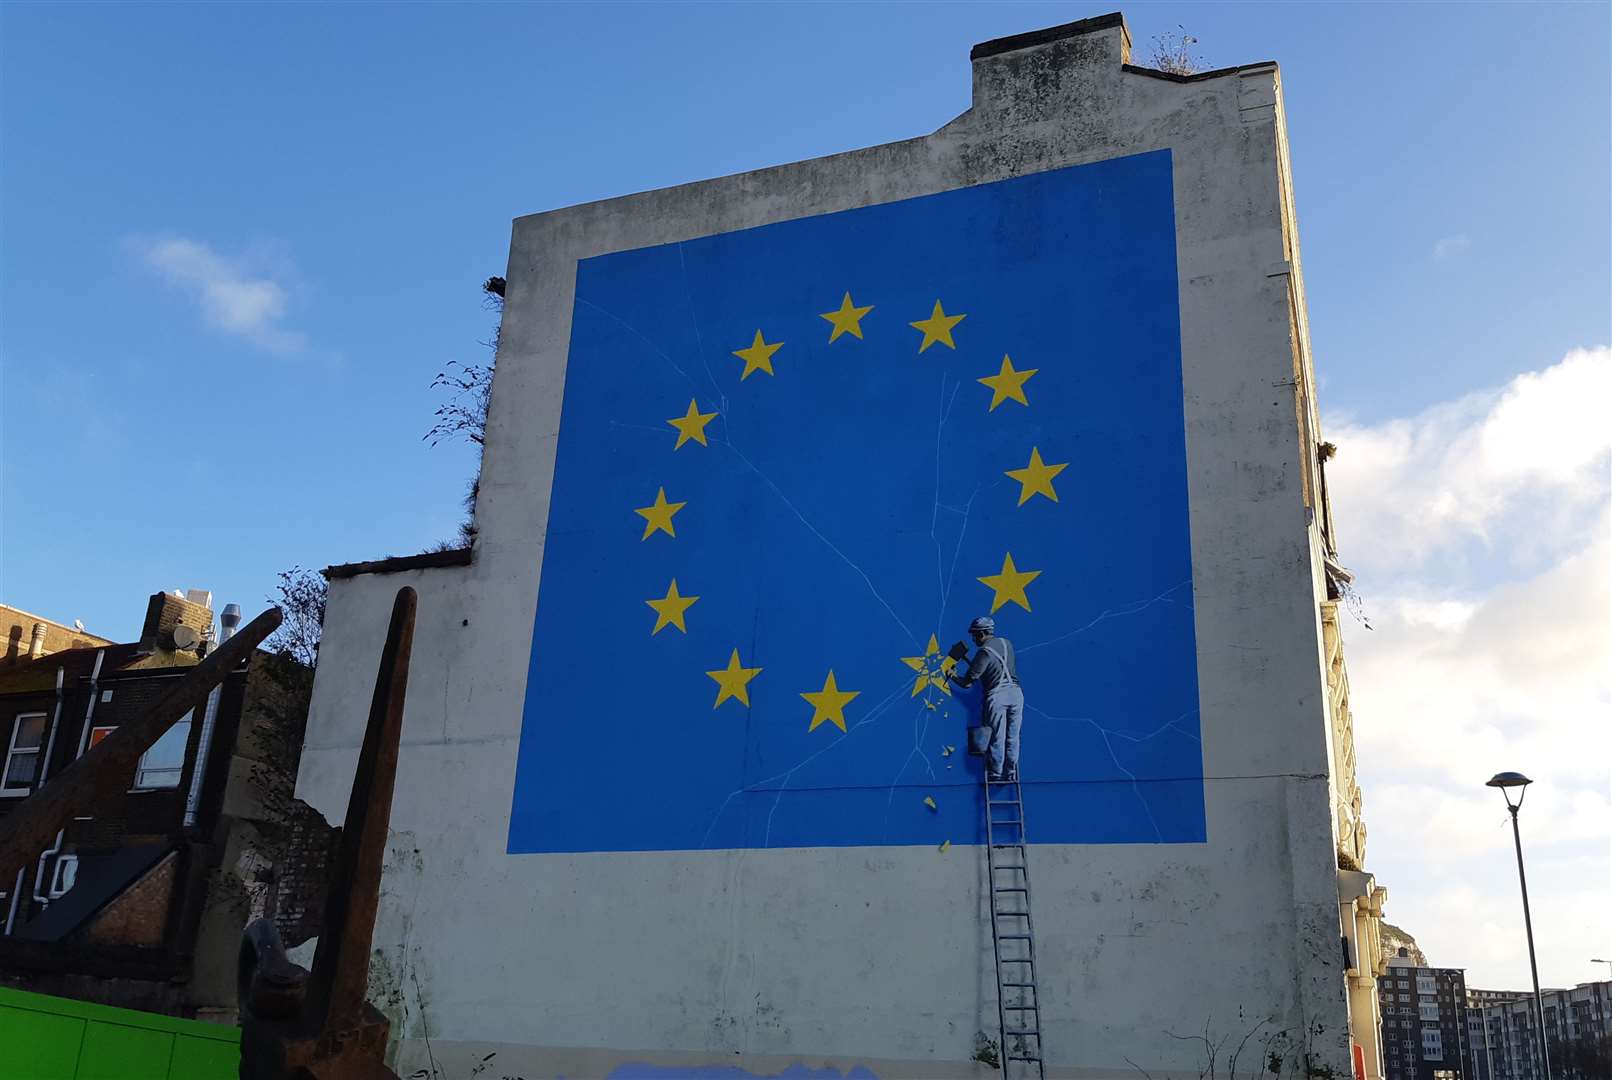 The Banksy Brexit mural in Dover, which was visible from 2017 to 2019